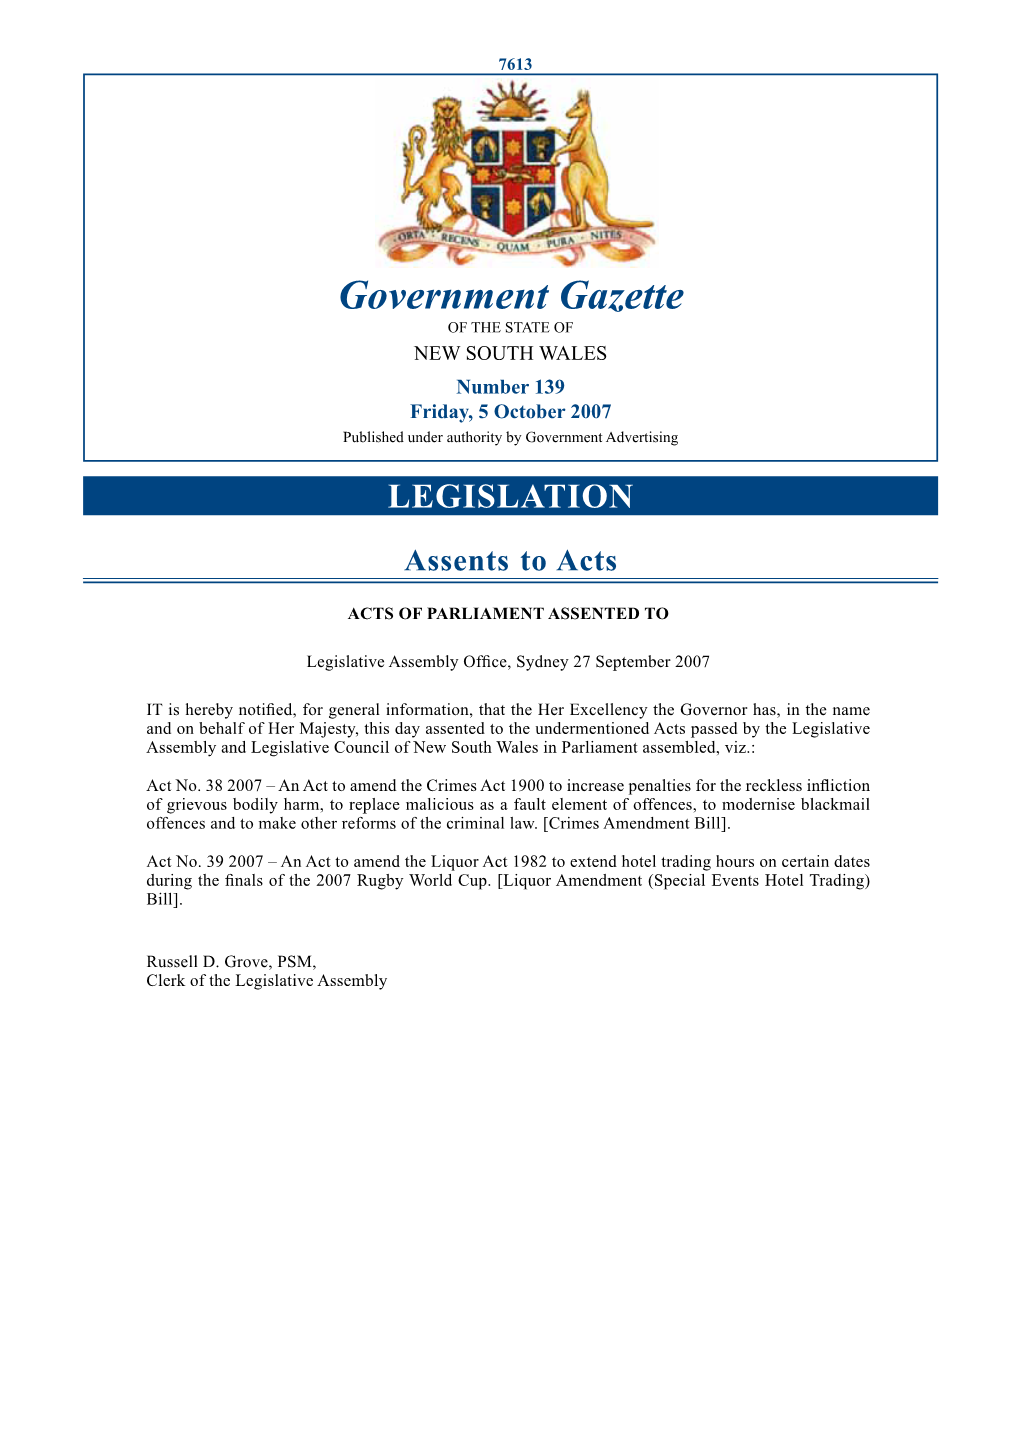 Government Gazette of the STATE of NEW SOUTH WALES Number 139 Friday, 5 October 2007 Published Under Authority by Government Advertising